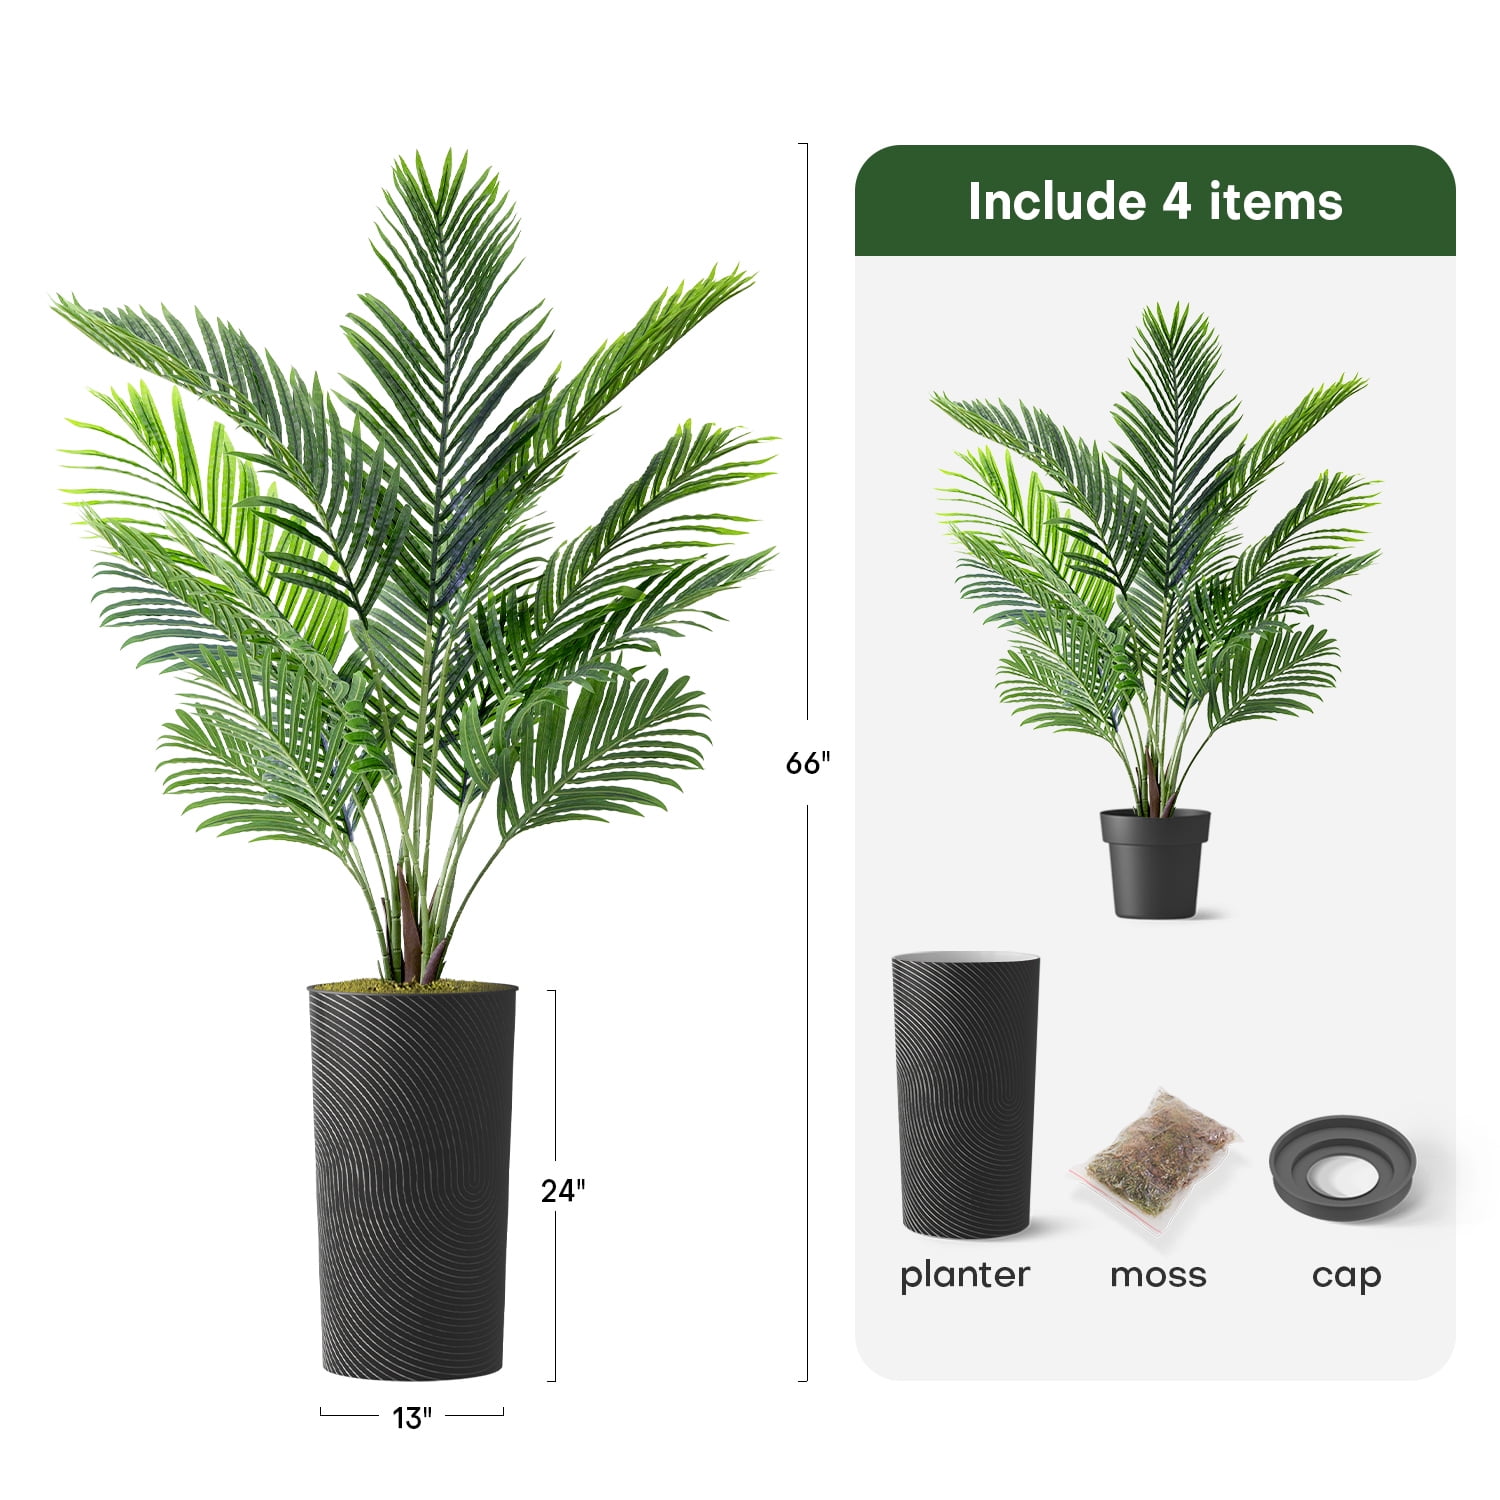 SIGNLEADER Artificial Tree In Modern Planter, Fake Ficus Silk Tree Home  Decoration (Plant Pot Plus Tree) & Reviews